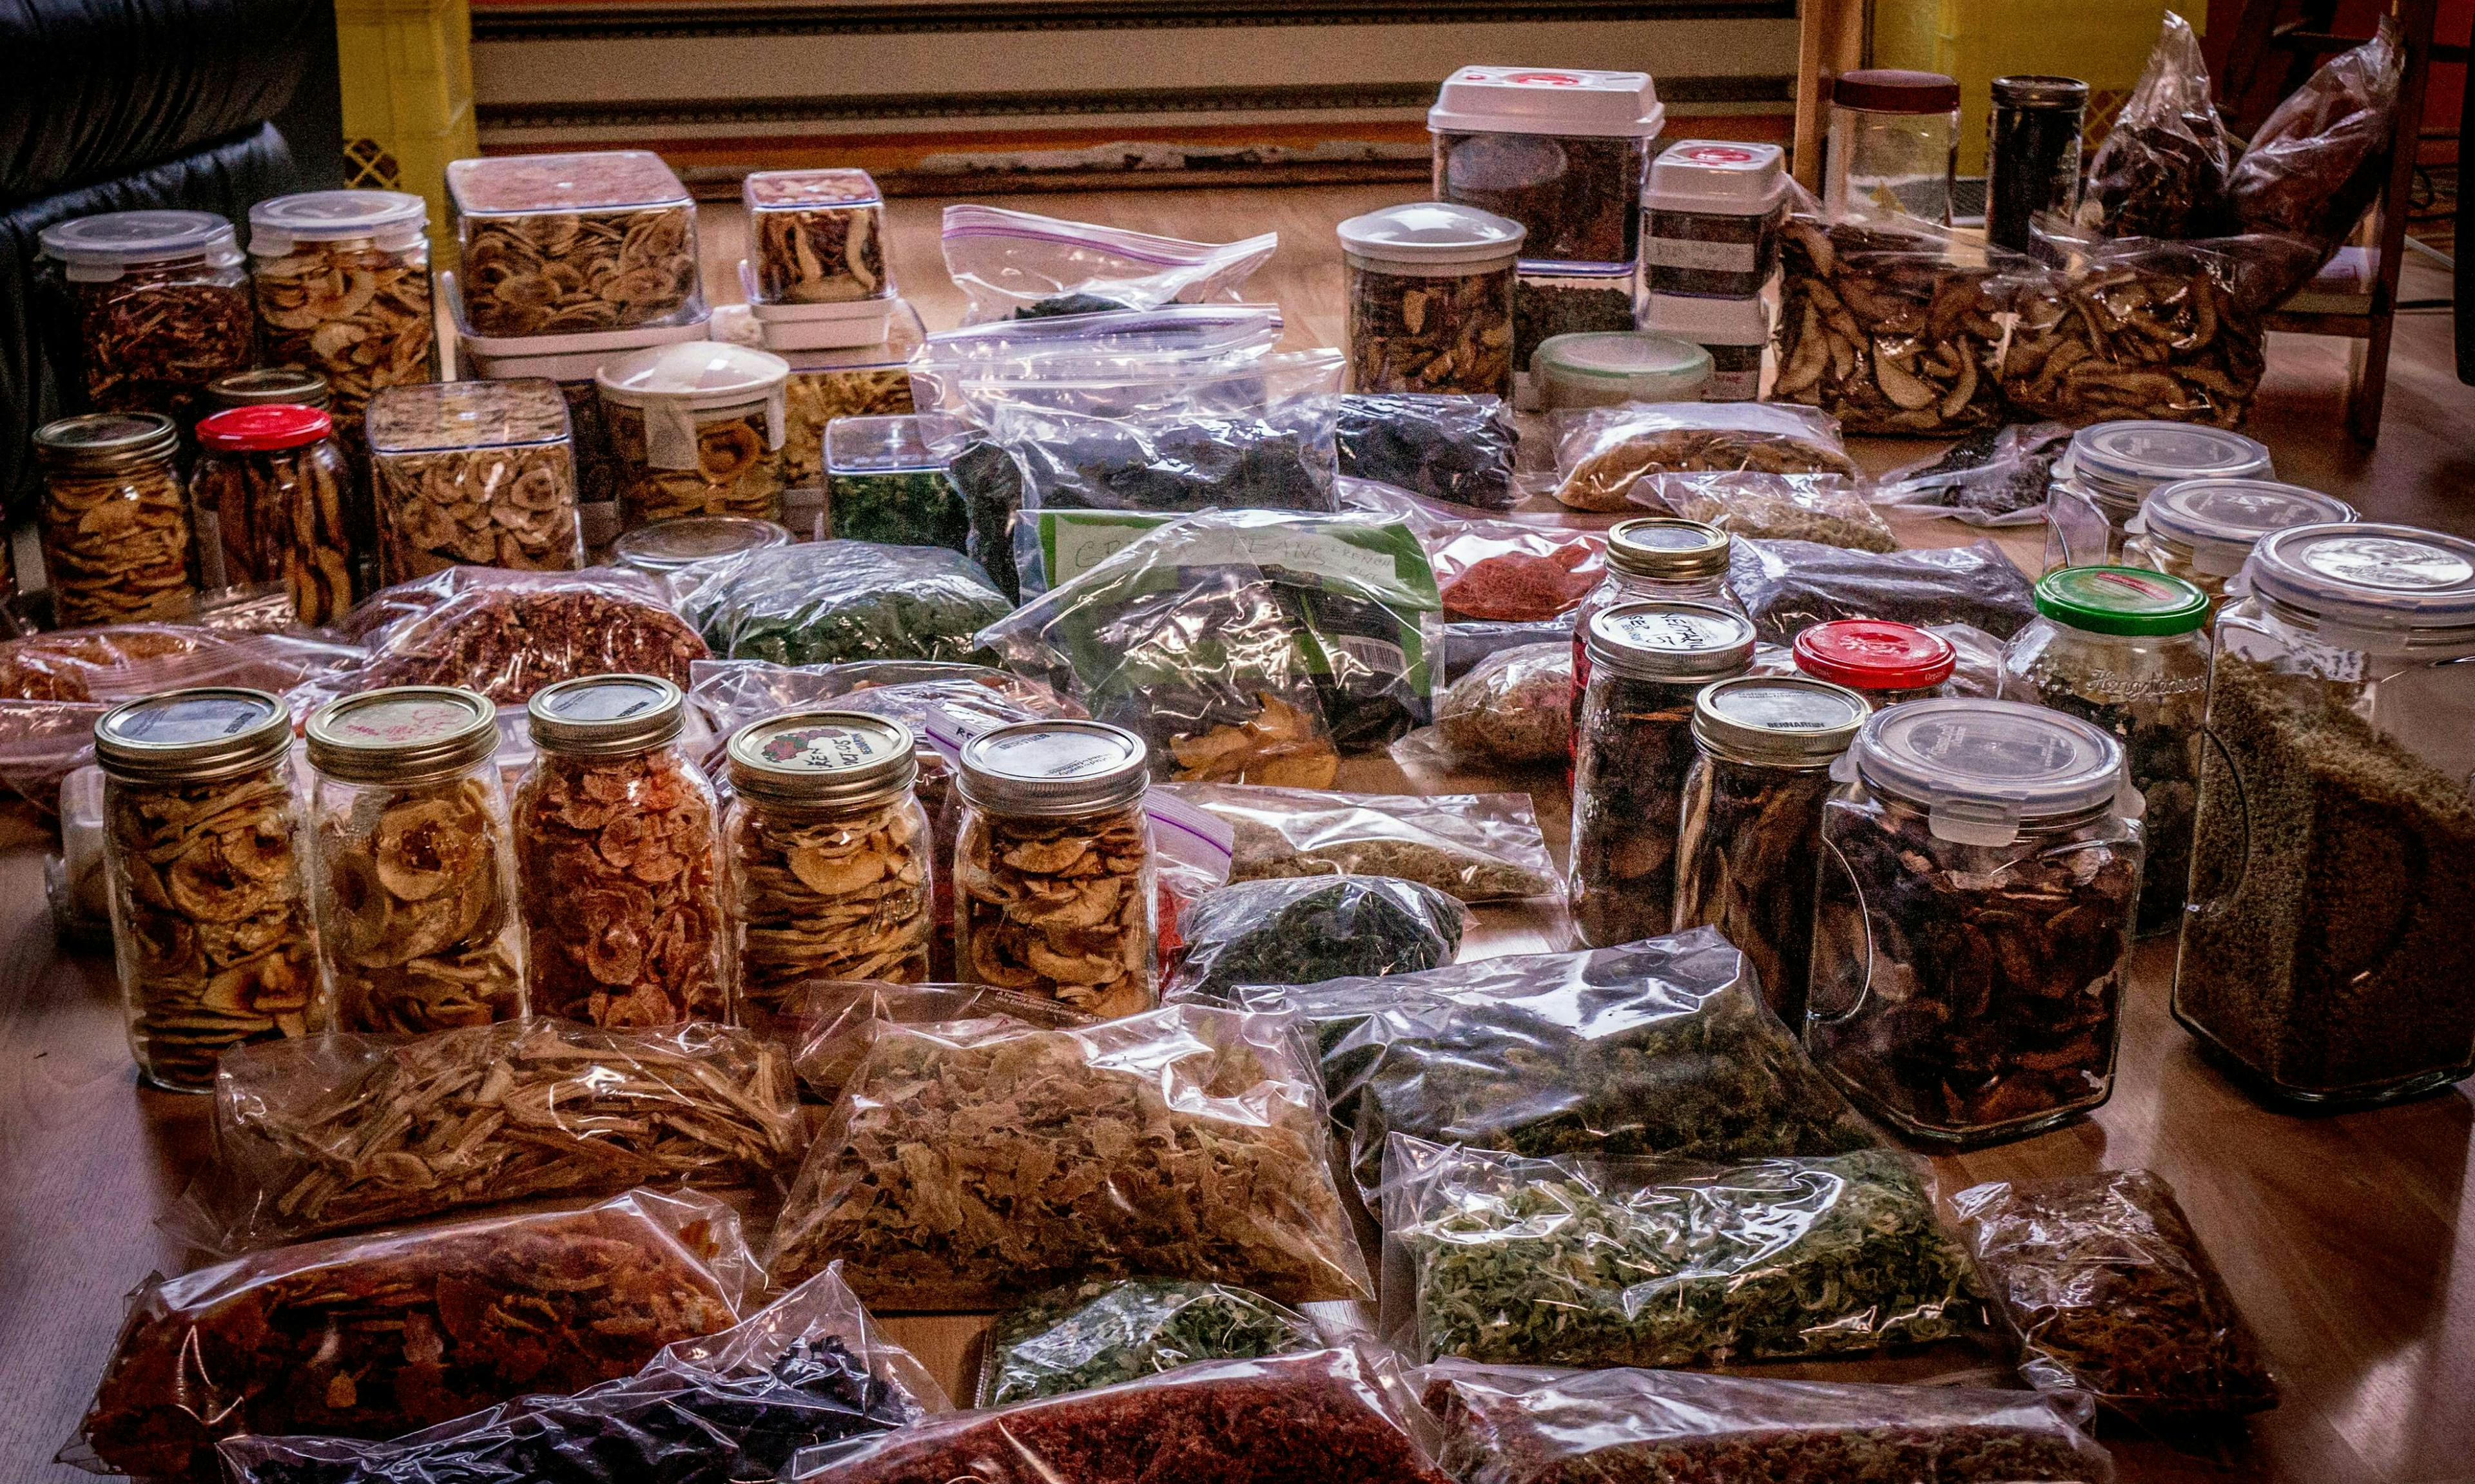 160 days' worth of dehydrated food packed into jars and zip-closure bags.